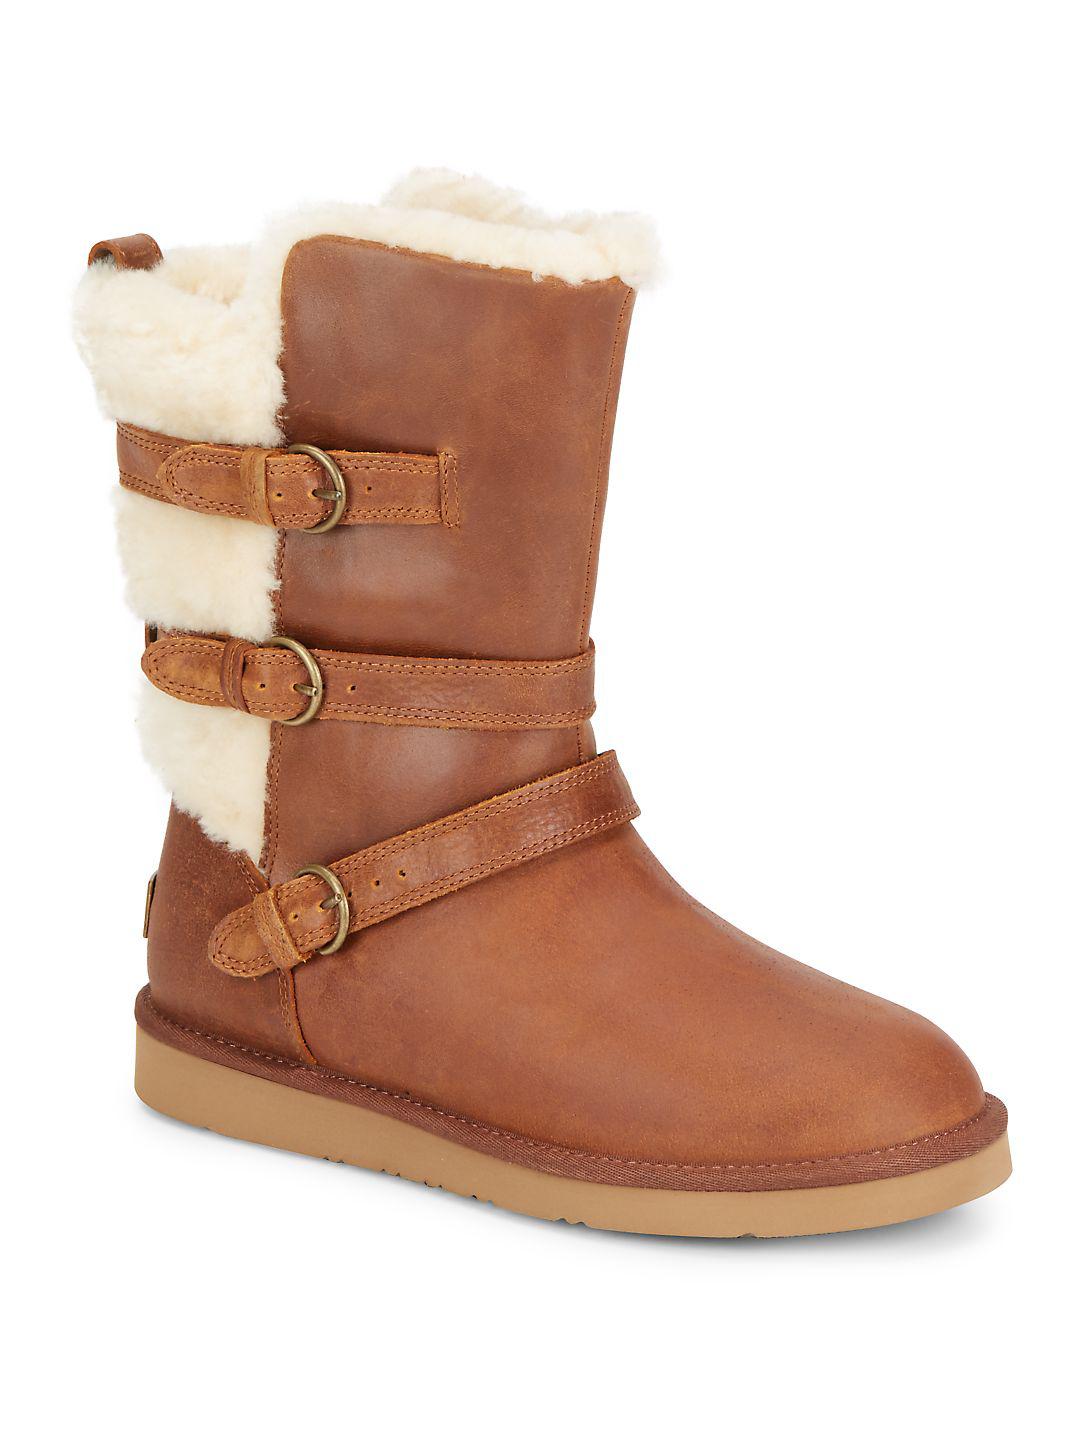 UGG Becket Leather Mid-calf Boots in Chestnut (Brown) - Lyst